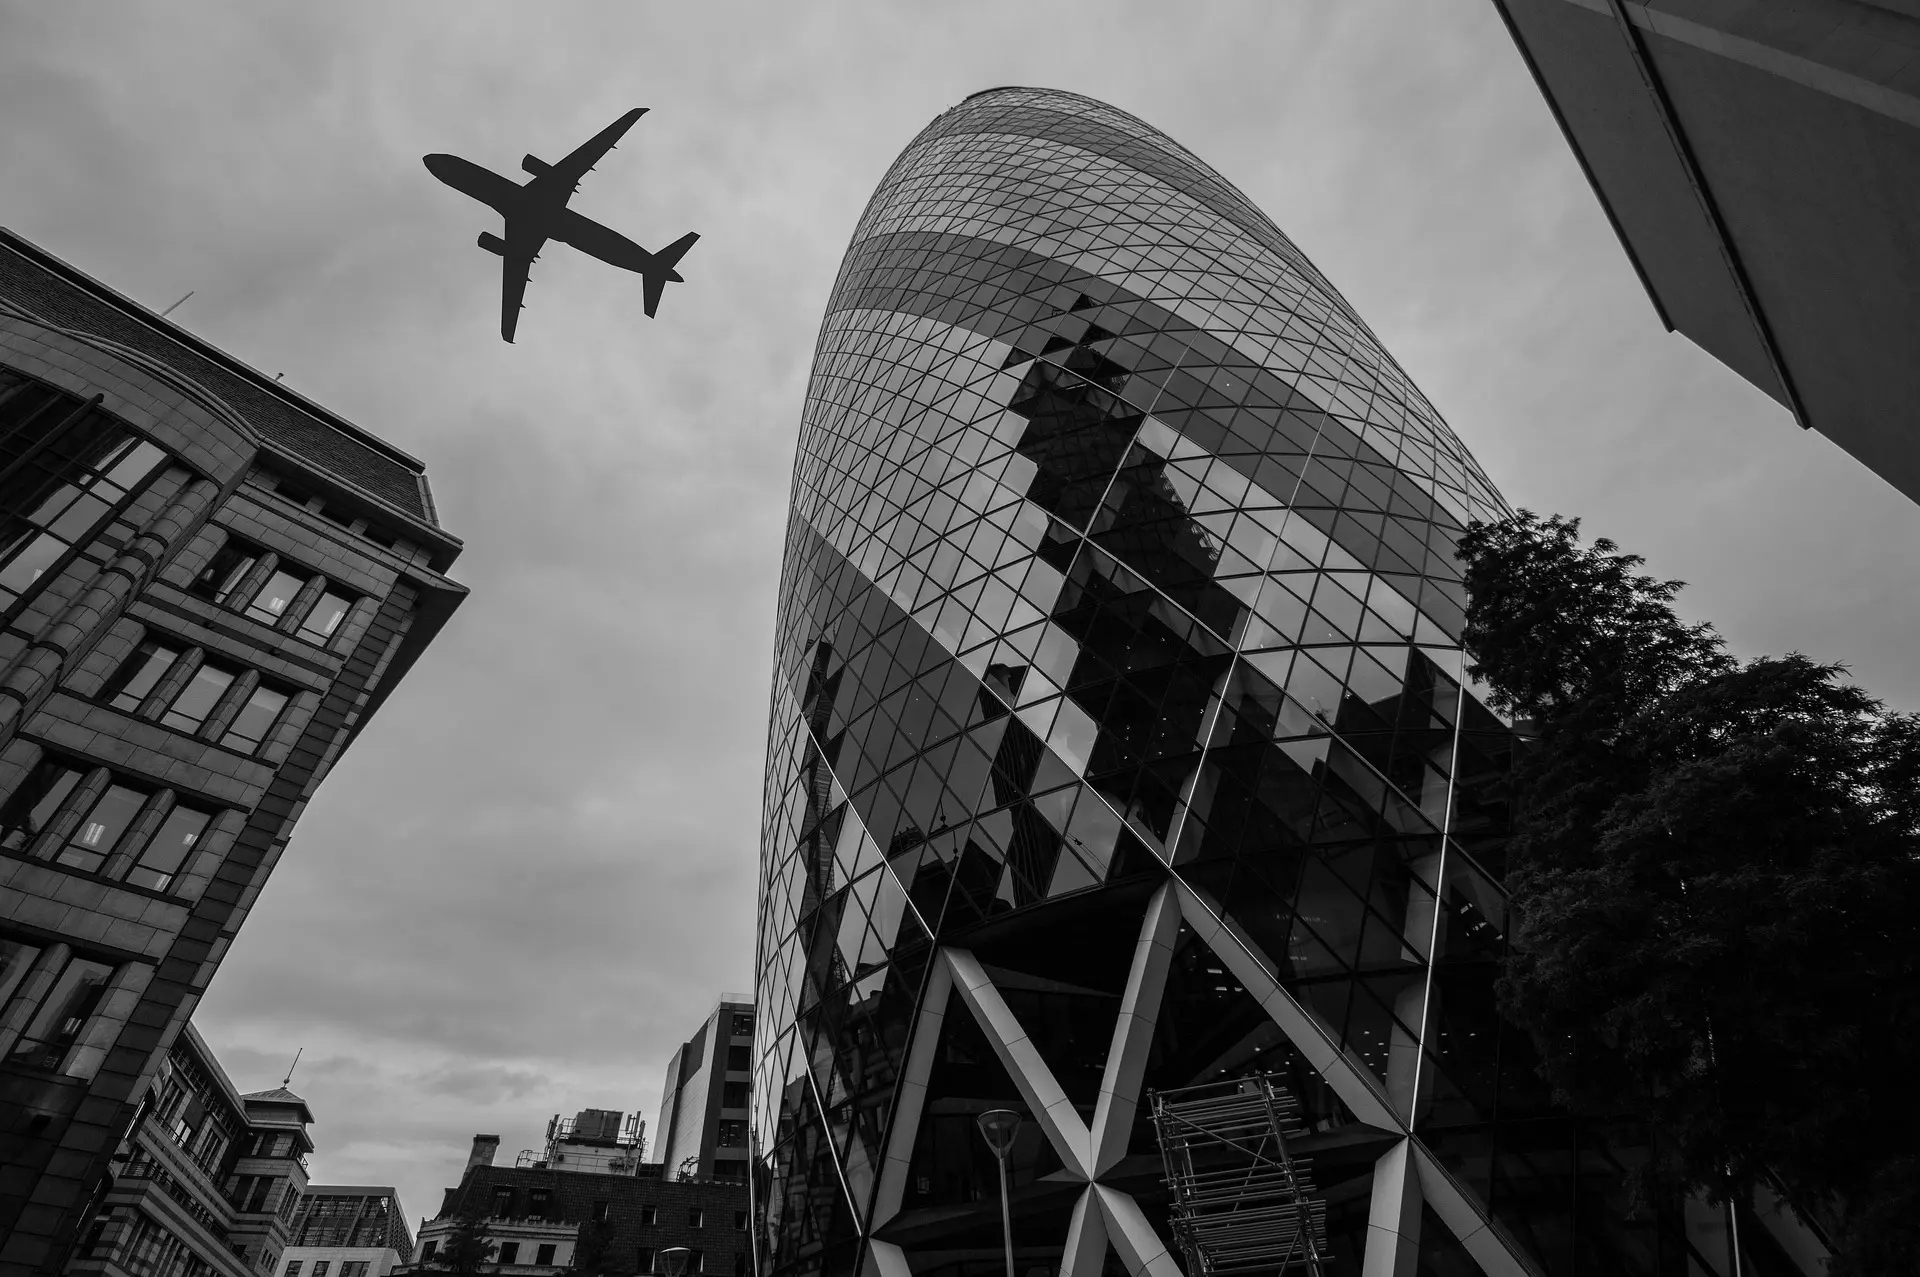 The Gherkin skyscraper viewed from below with an aircraft silhouetted against grey skies